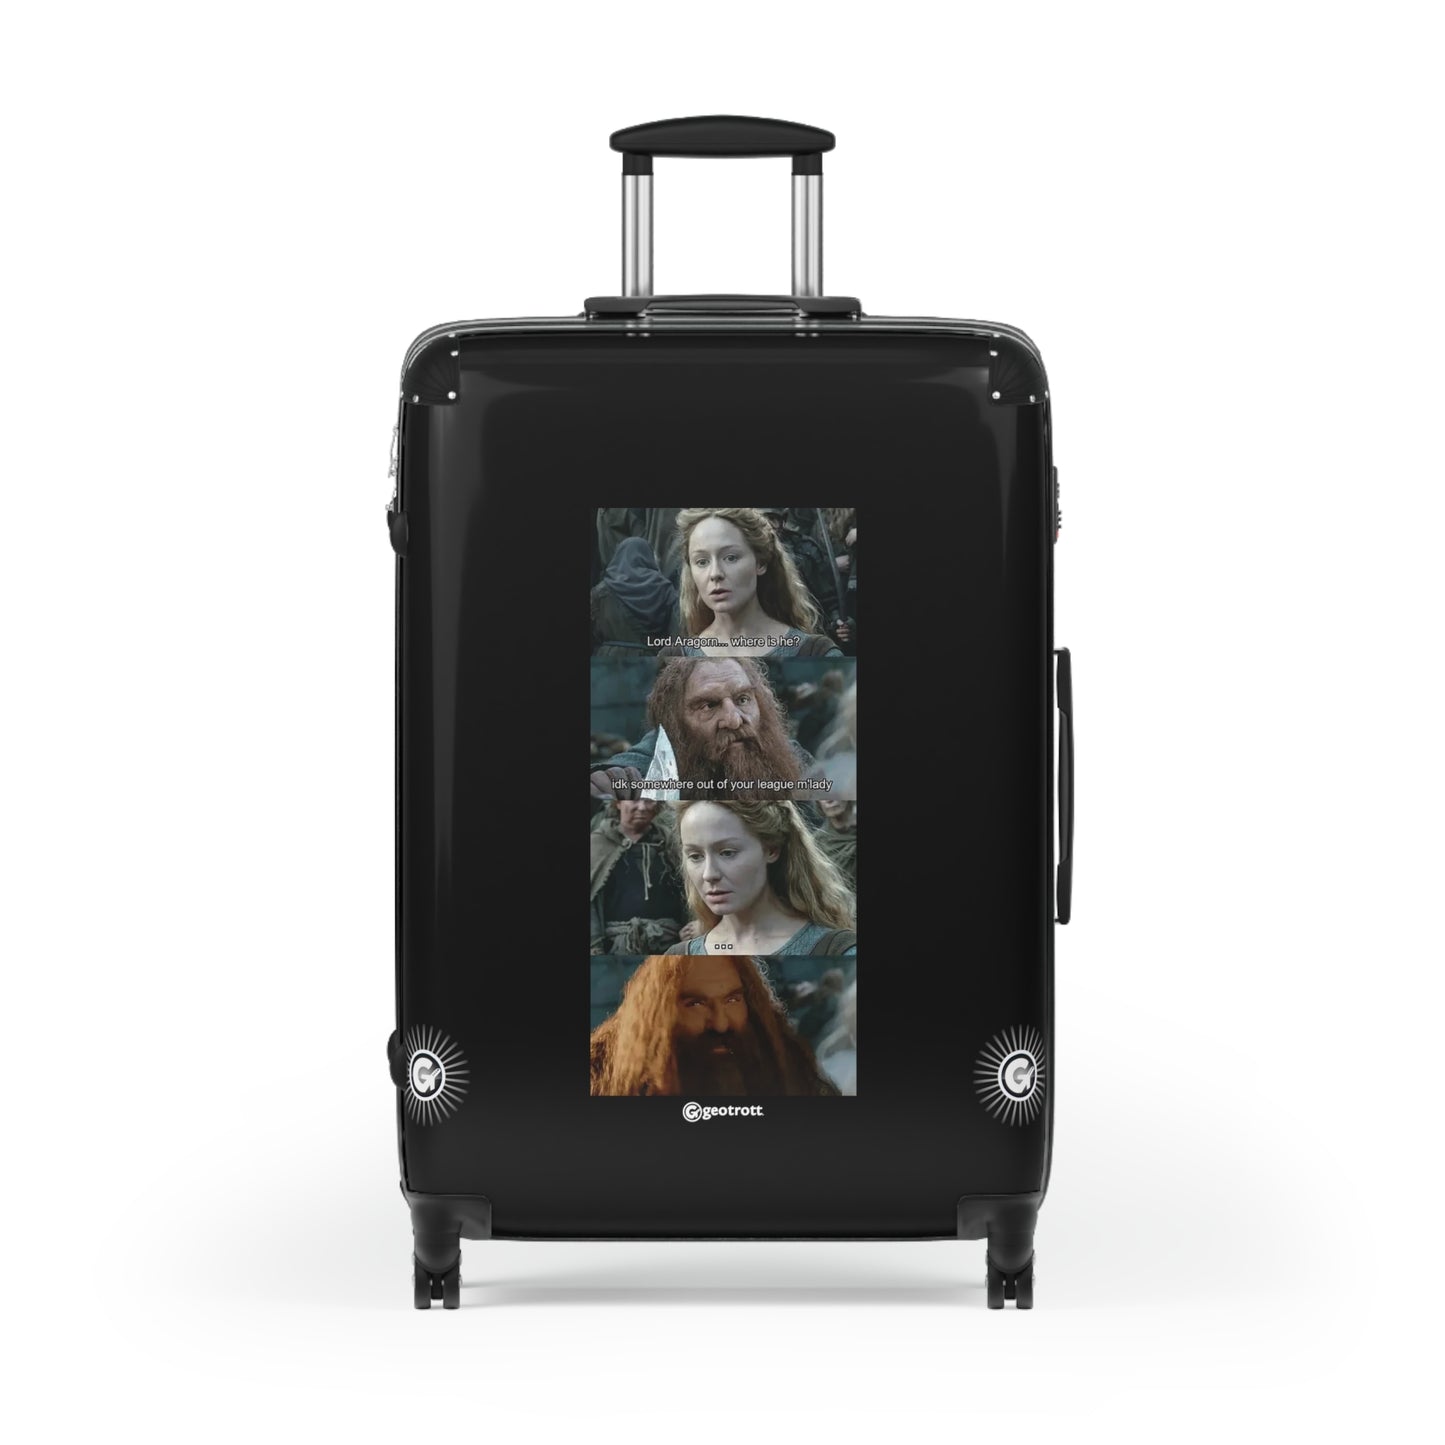 Glóin Éowyn Flirt Joke Lord Of The Rings MEME Funny Inspirational Luggage Bag Rolling Suitcase Travel Accessories